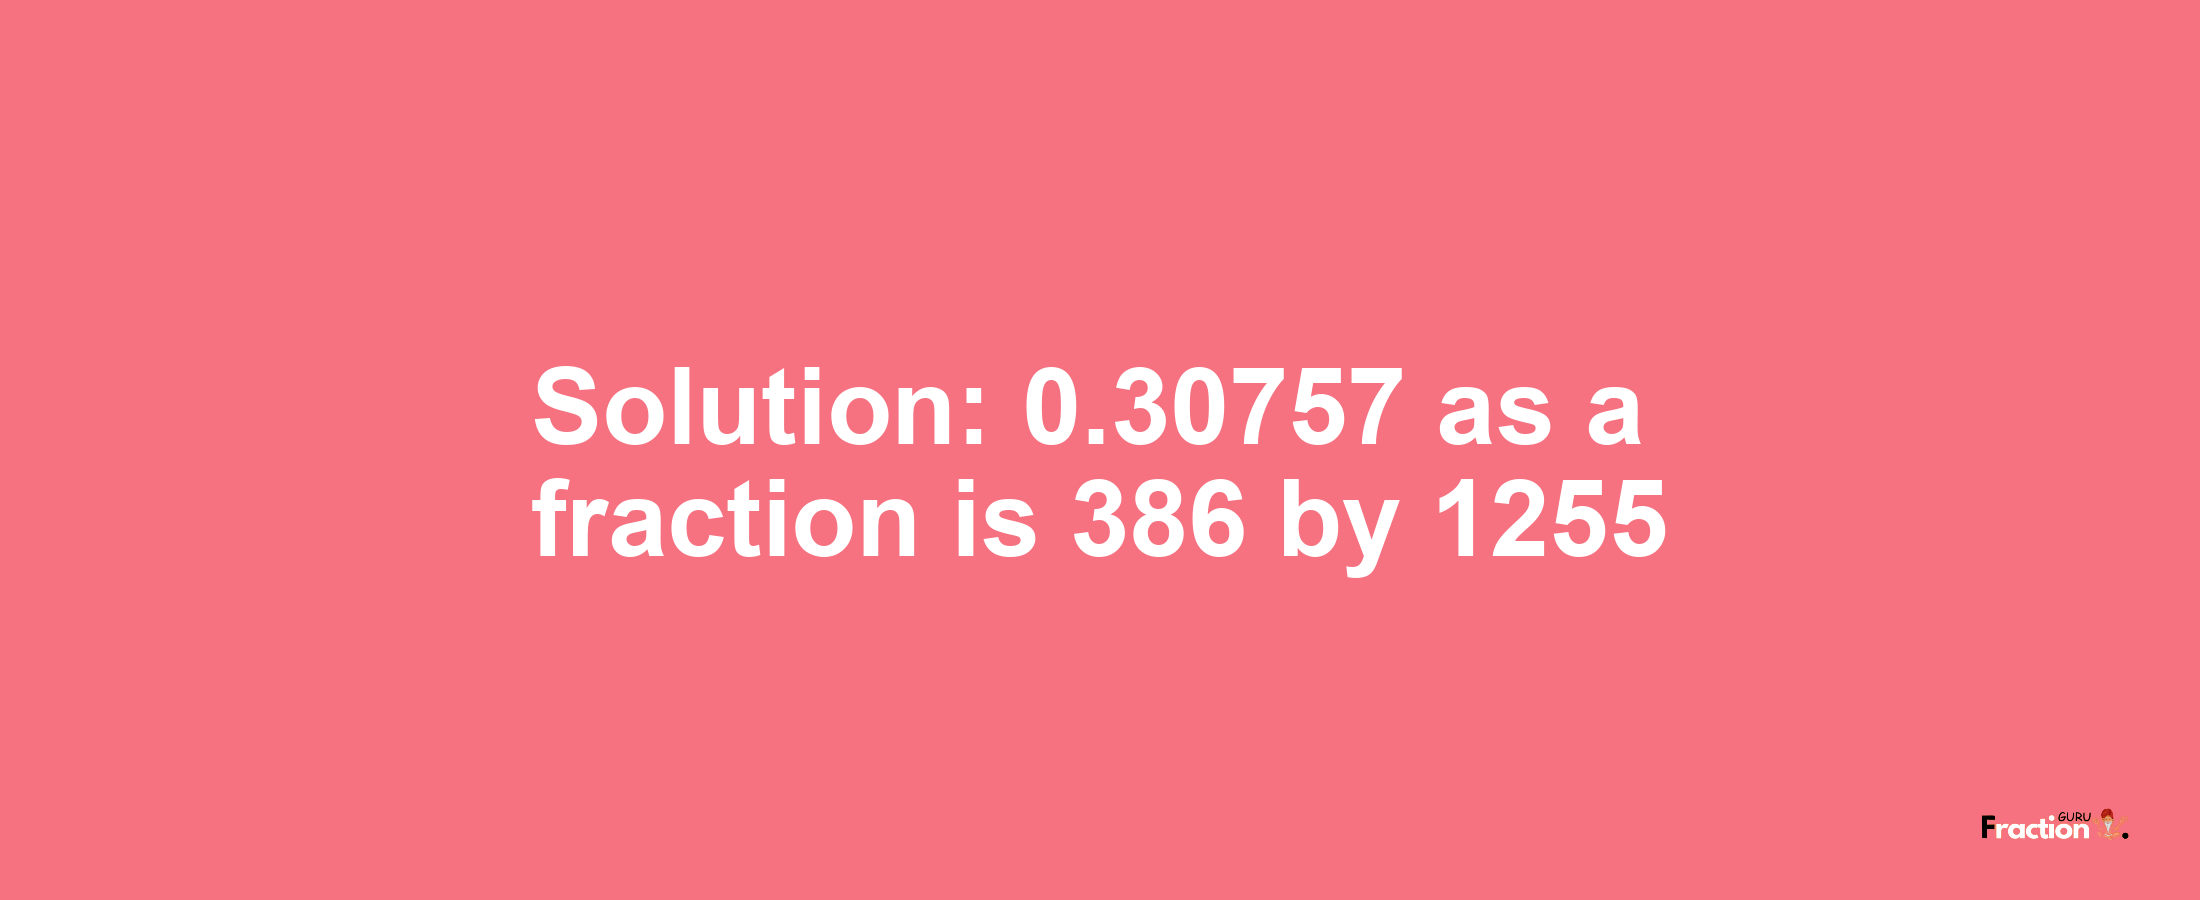 Solution:0.30757 as a fraction is 386/1255